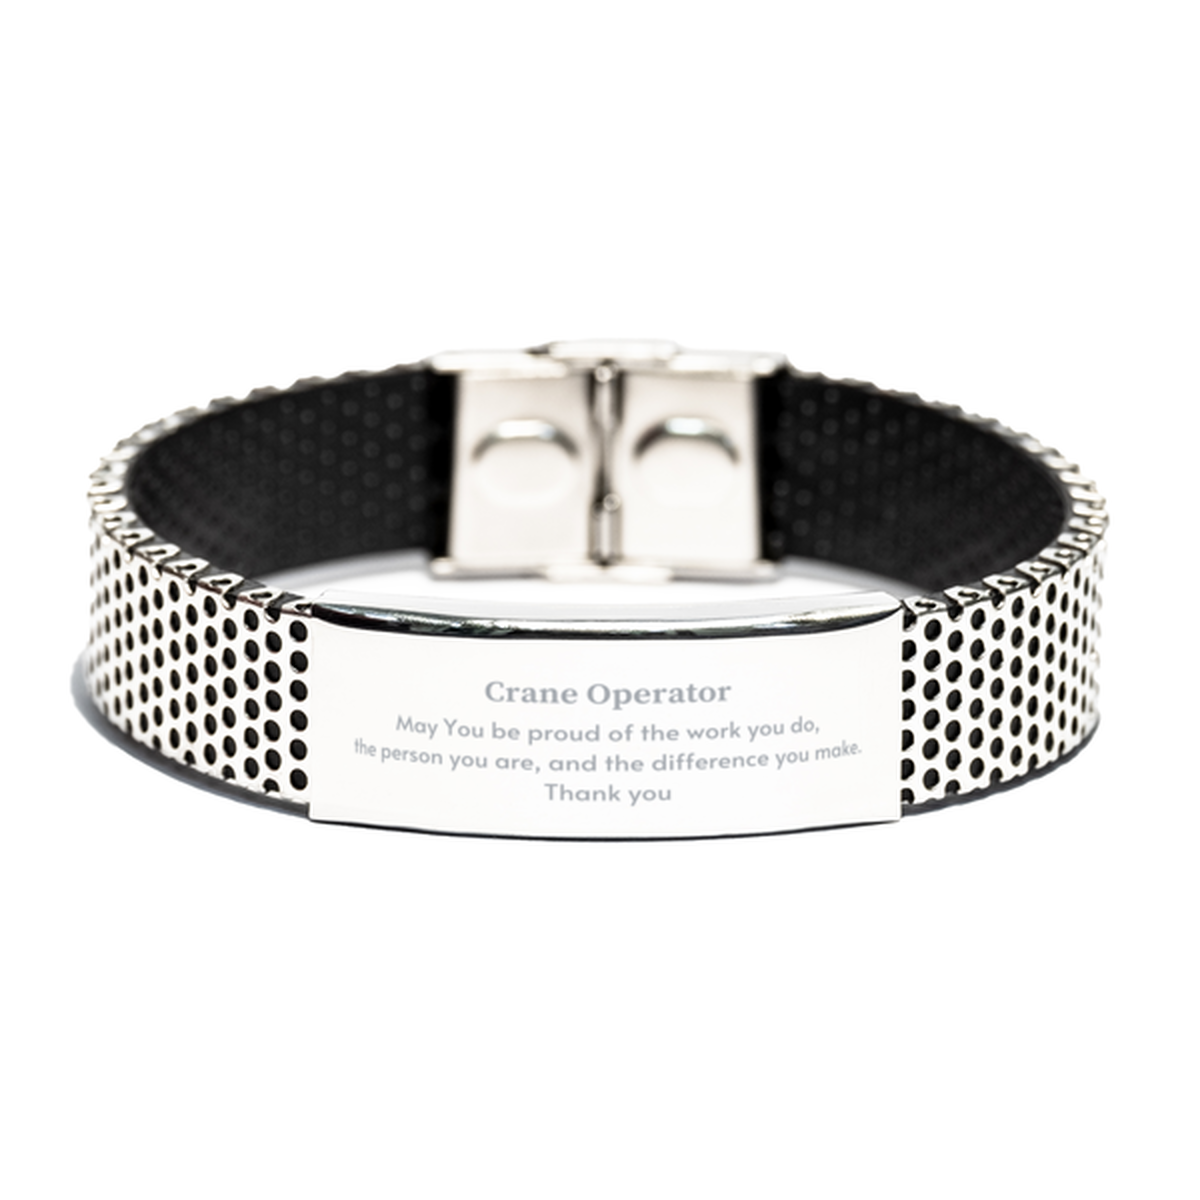 Heartwarming Stainless Steel Bracelet Retirement Coworkers Gifts for Crane Operator, Crane Operator May You be proud of the work you do, the person you are Gifts for Boss Men Women Friends